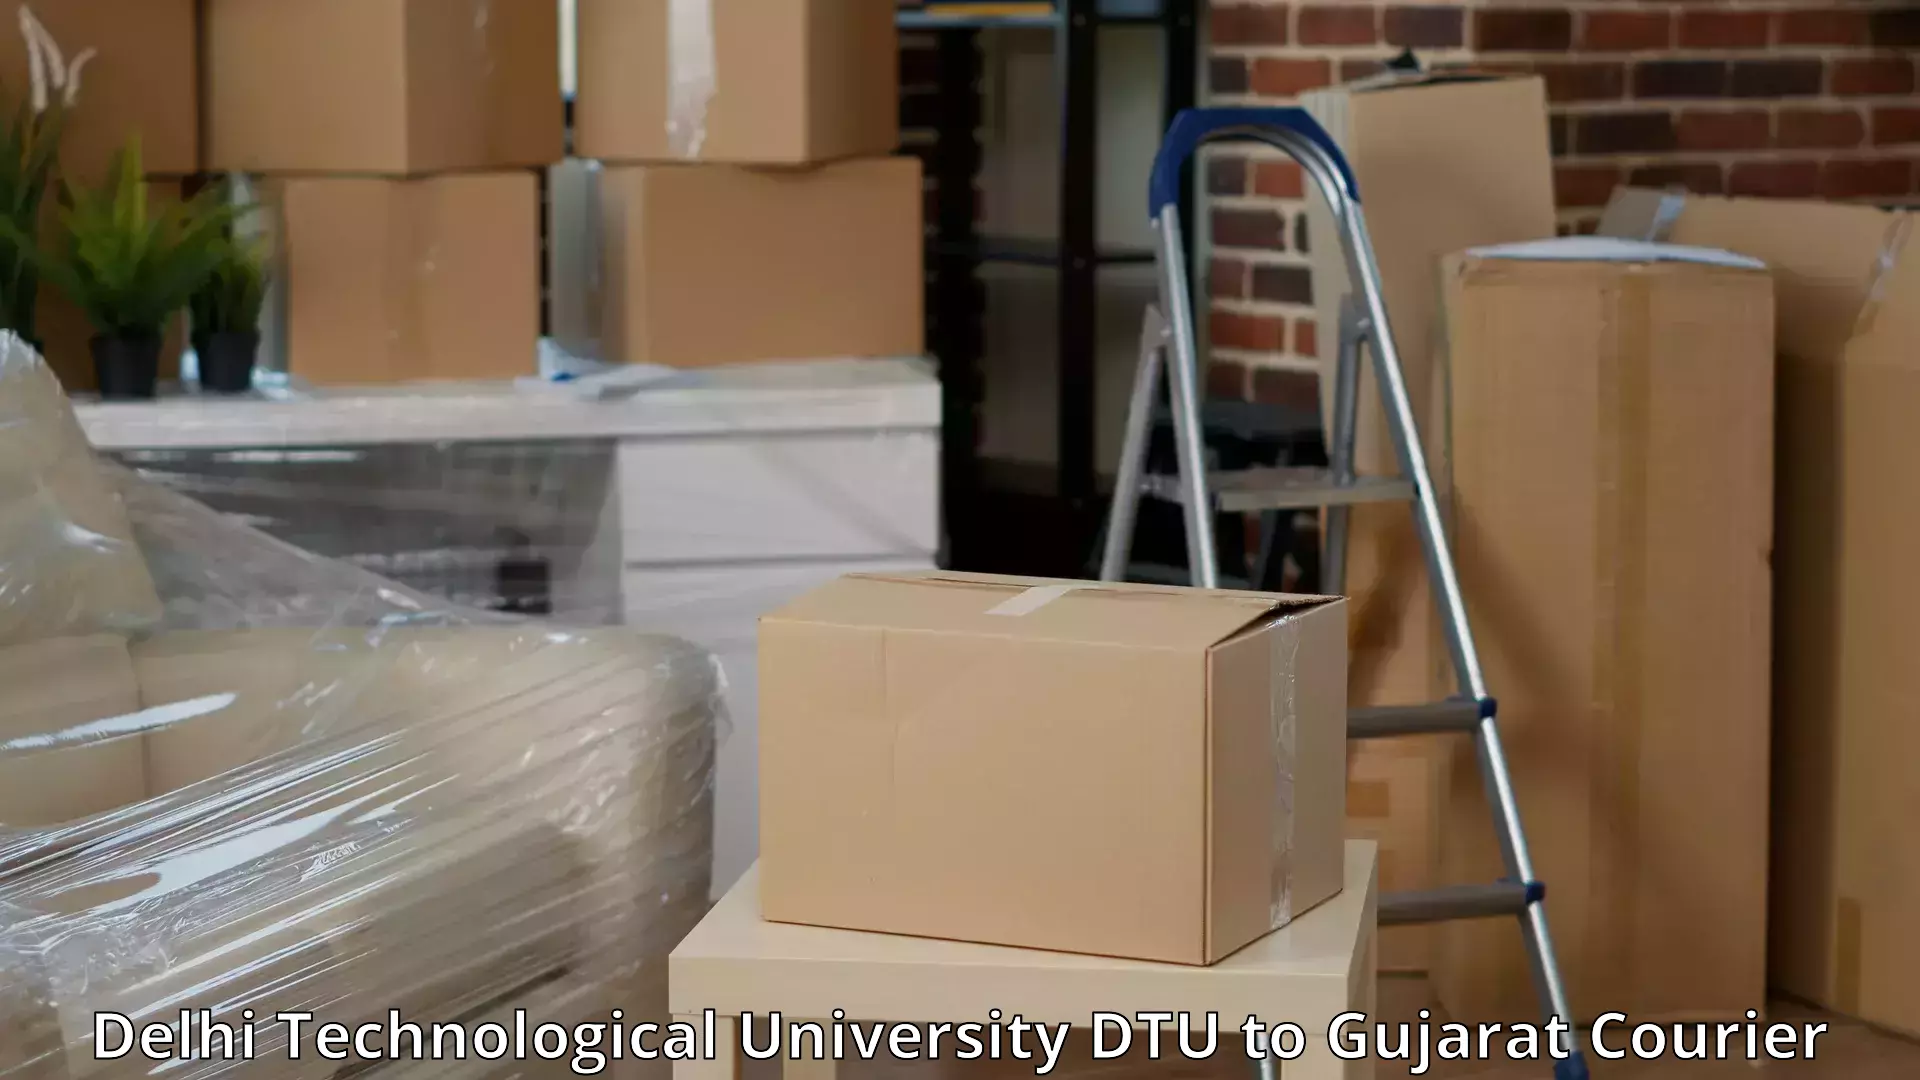 Quality relocation services in Delhi Technological University DTU to Gujarat